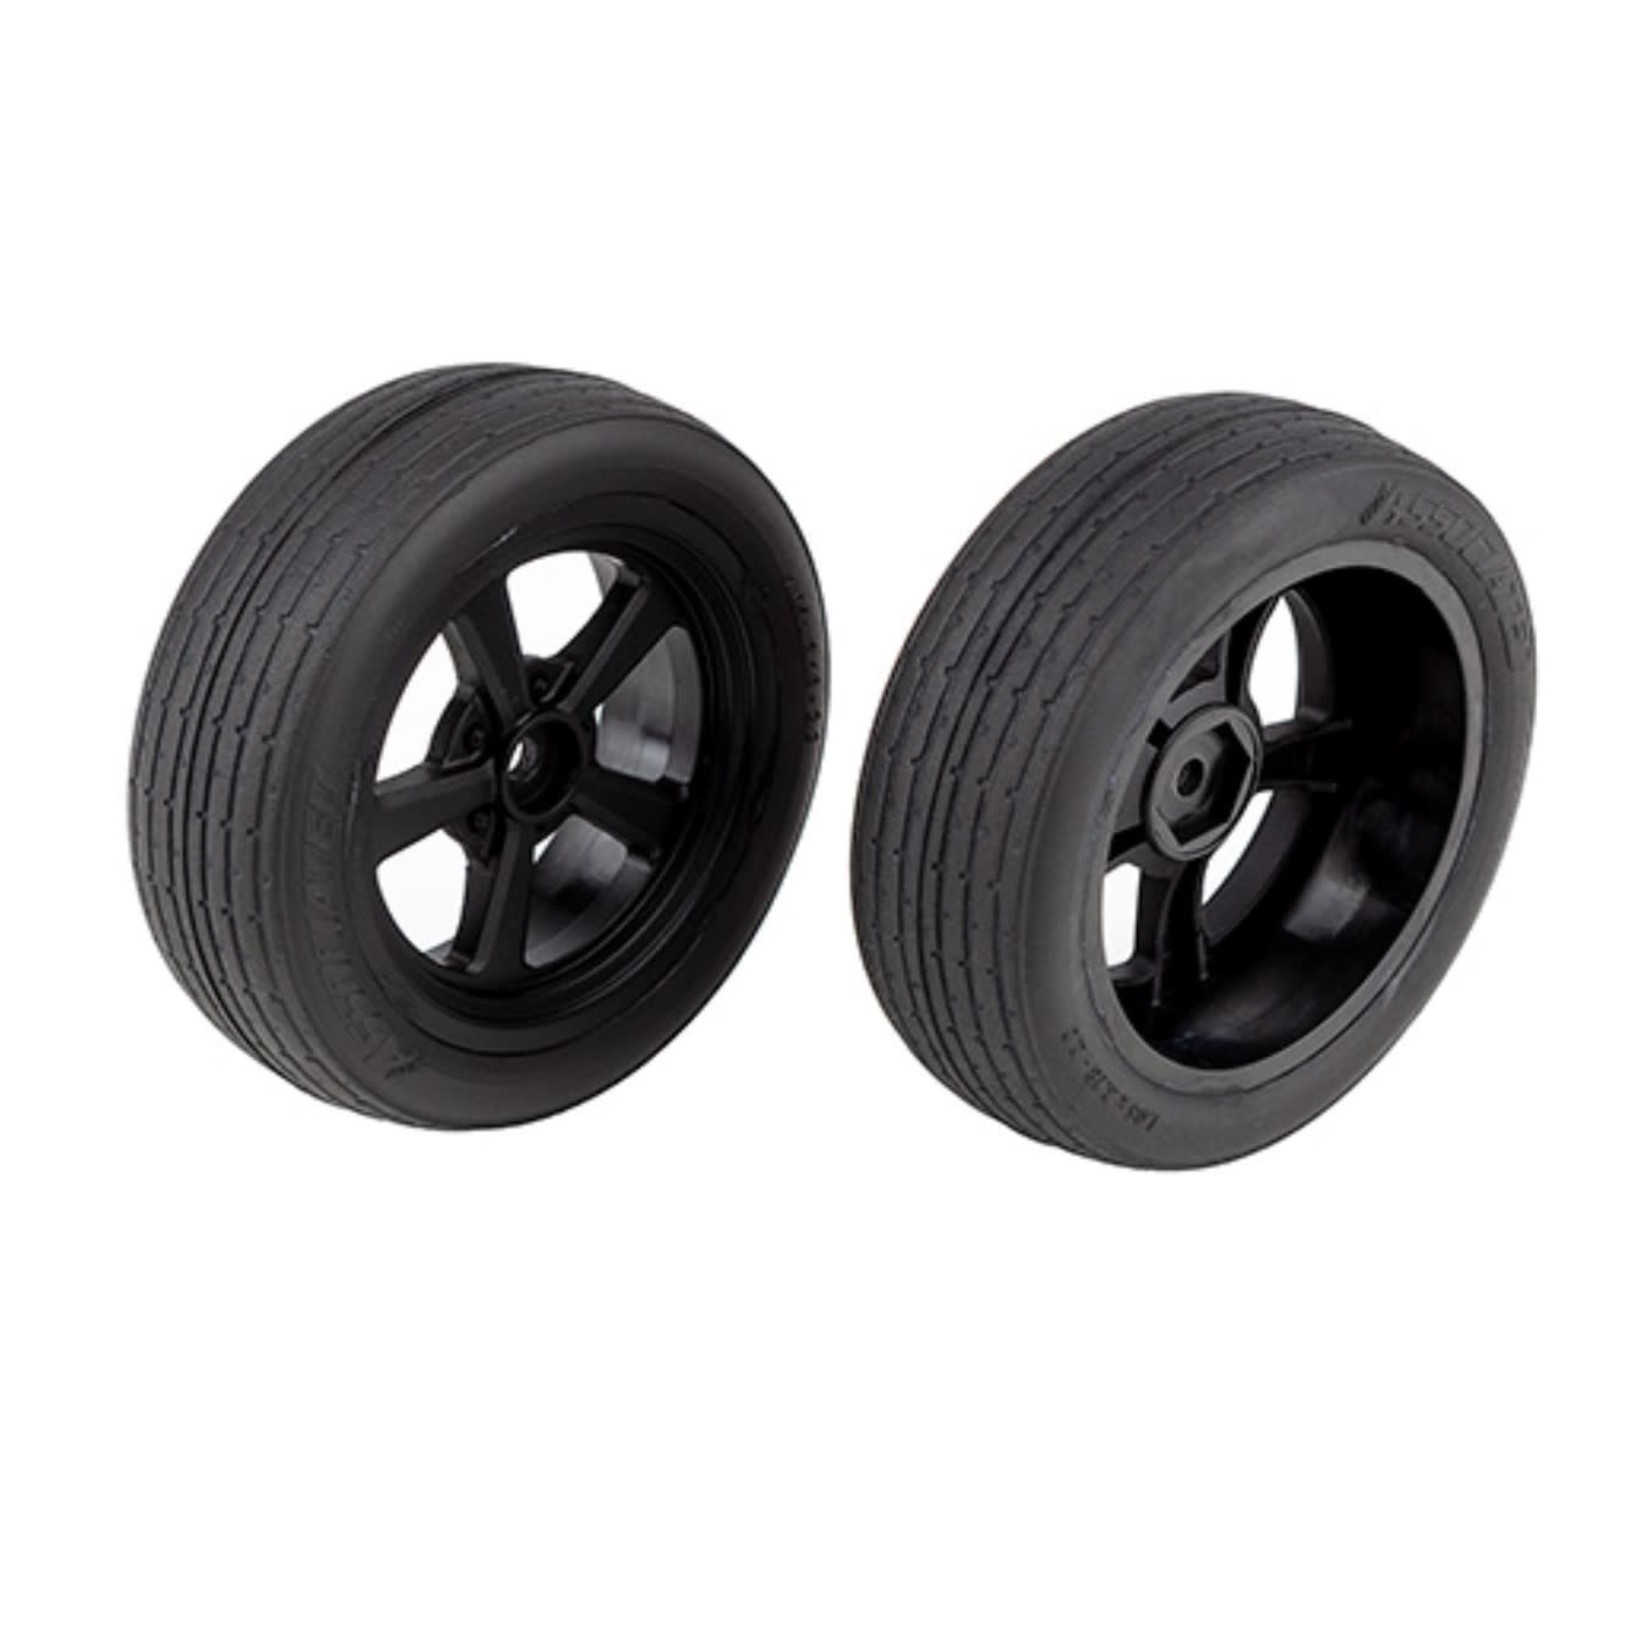 Team Associated DR10 Front Wheels and Drag Tires, mounted (2)